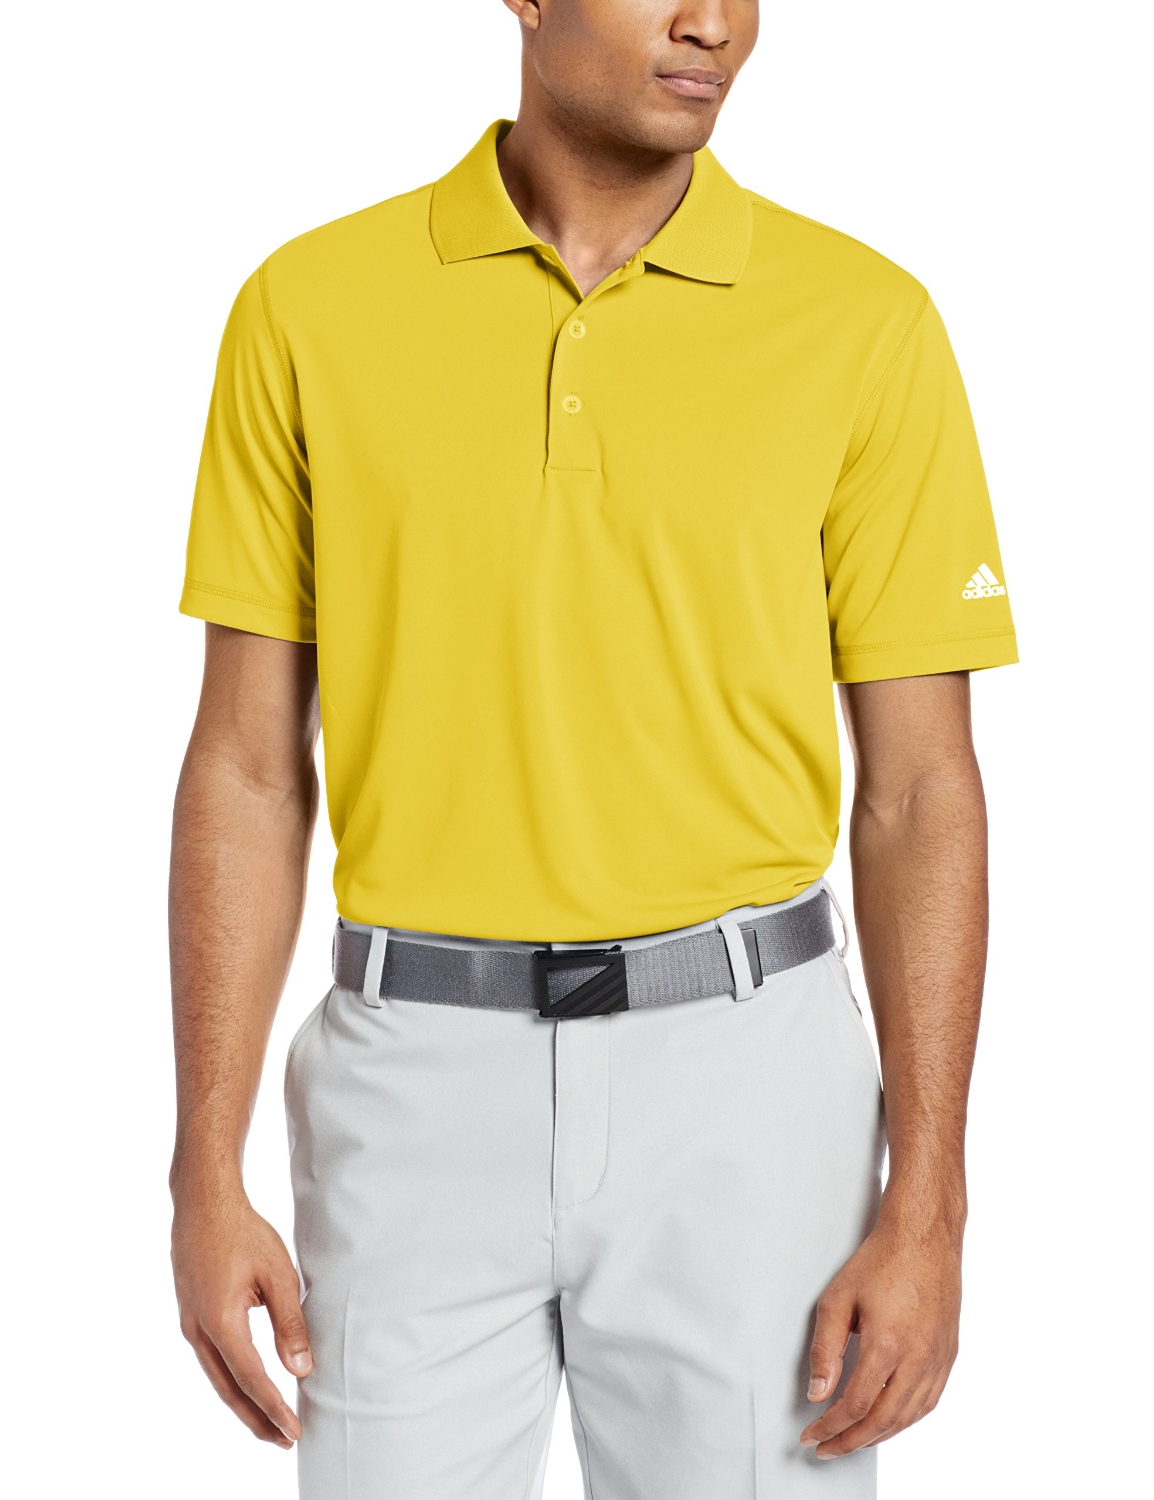 Mens Puremotion Solid Jersey Golf Polo Shirts